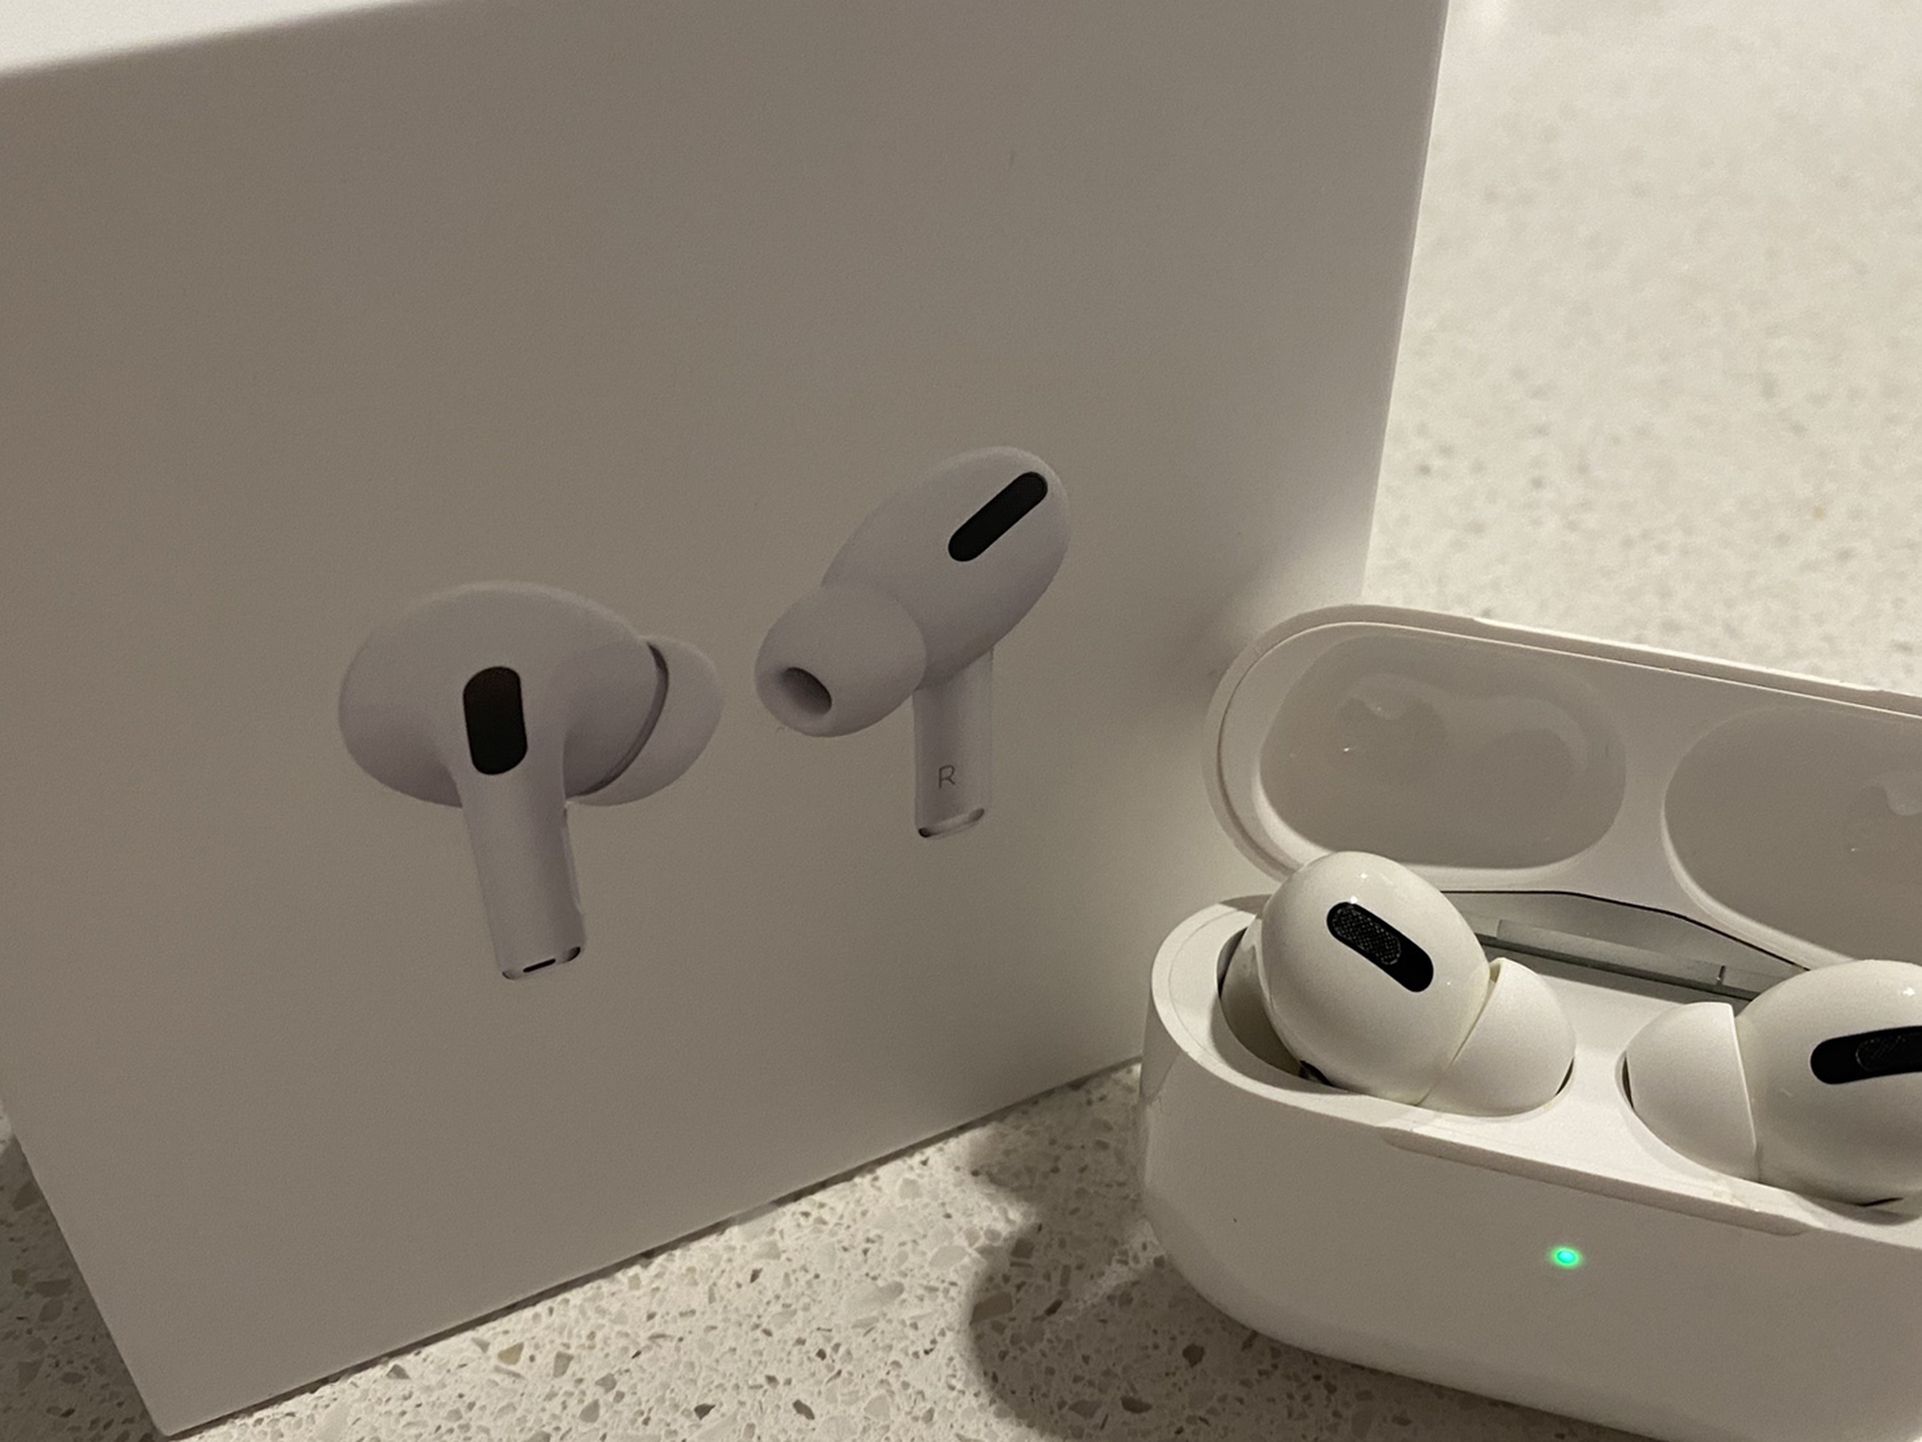 AirPod Pro With Noise Cancellation